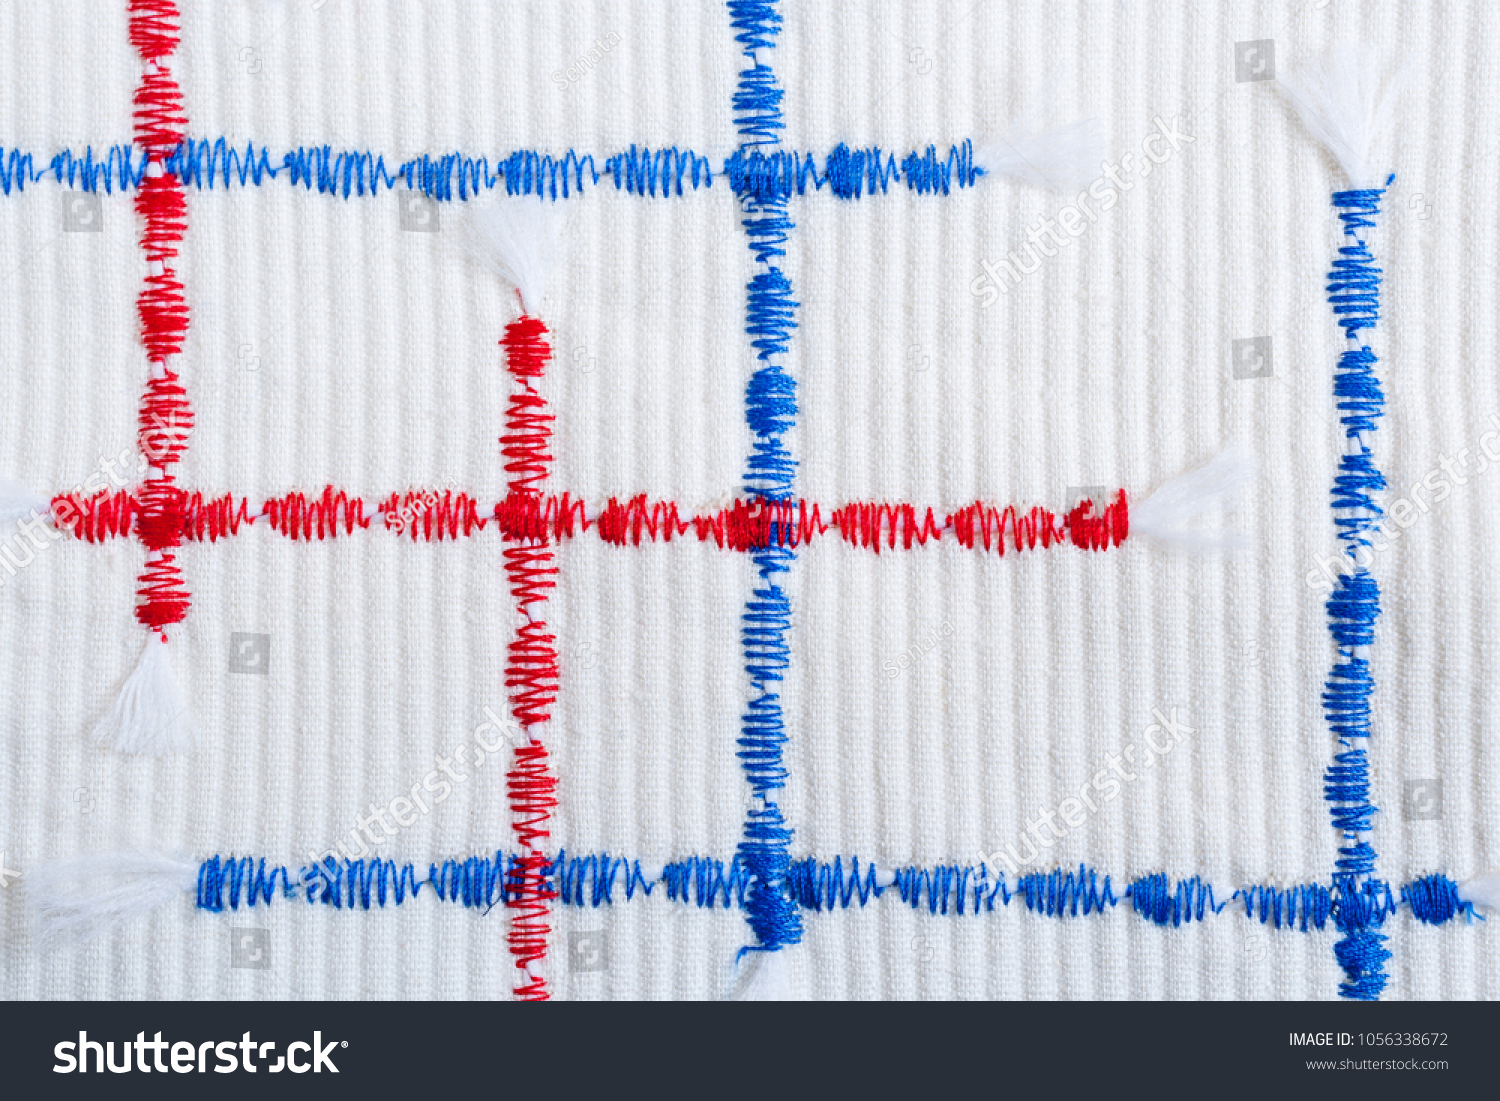 Close-up randomly arranged vertical and horizontal red and blue textural  zigzag seams on relief white fabric. #1056338672